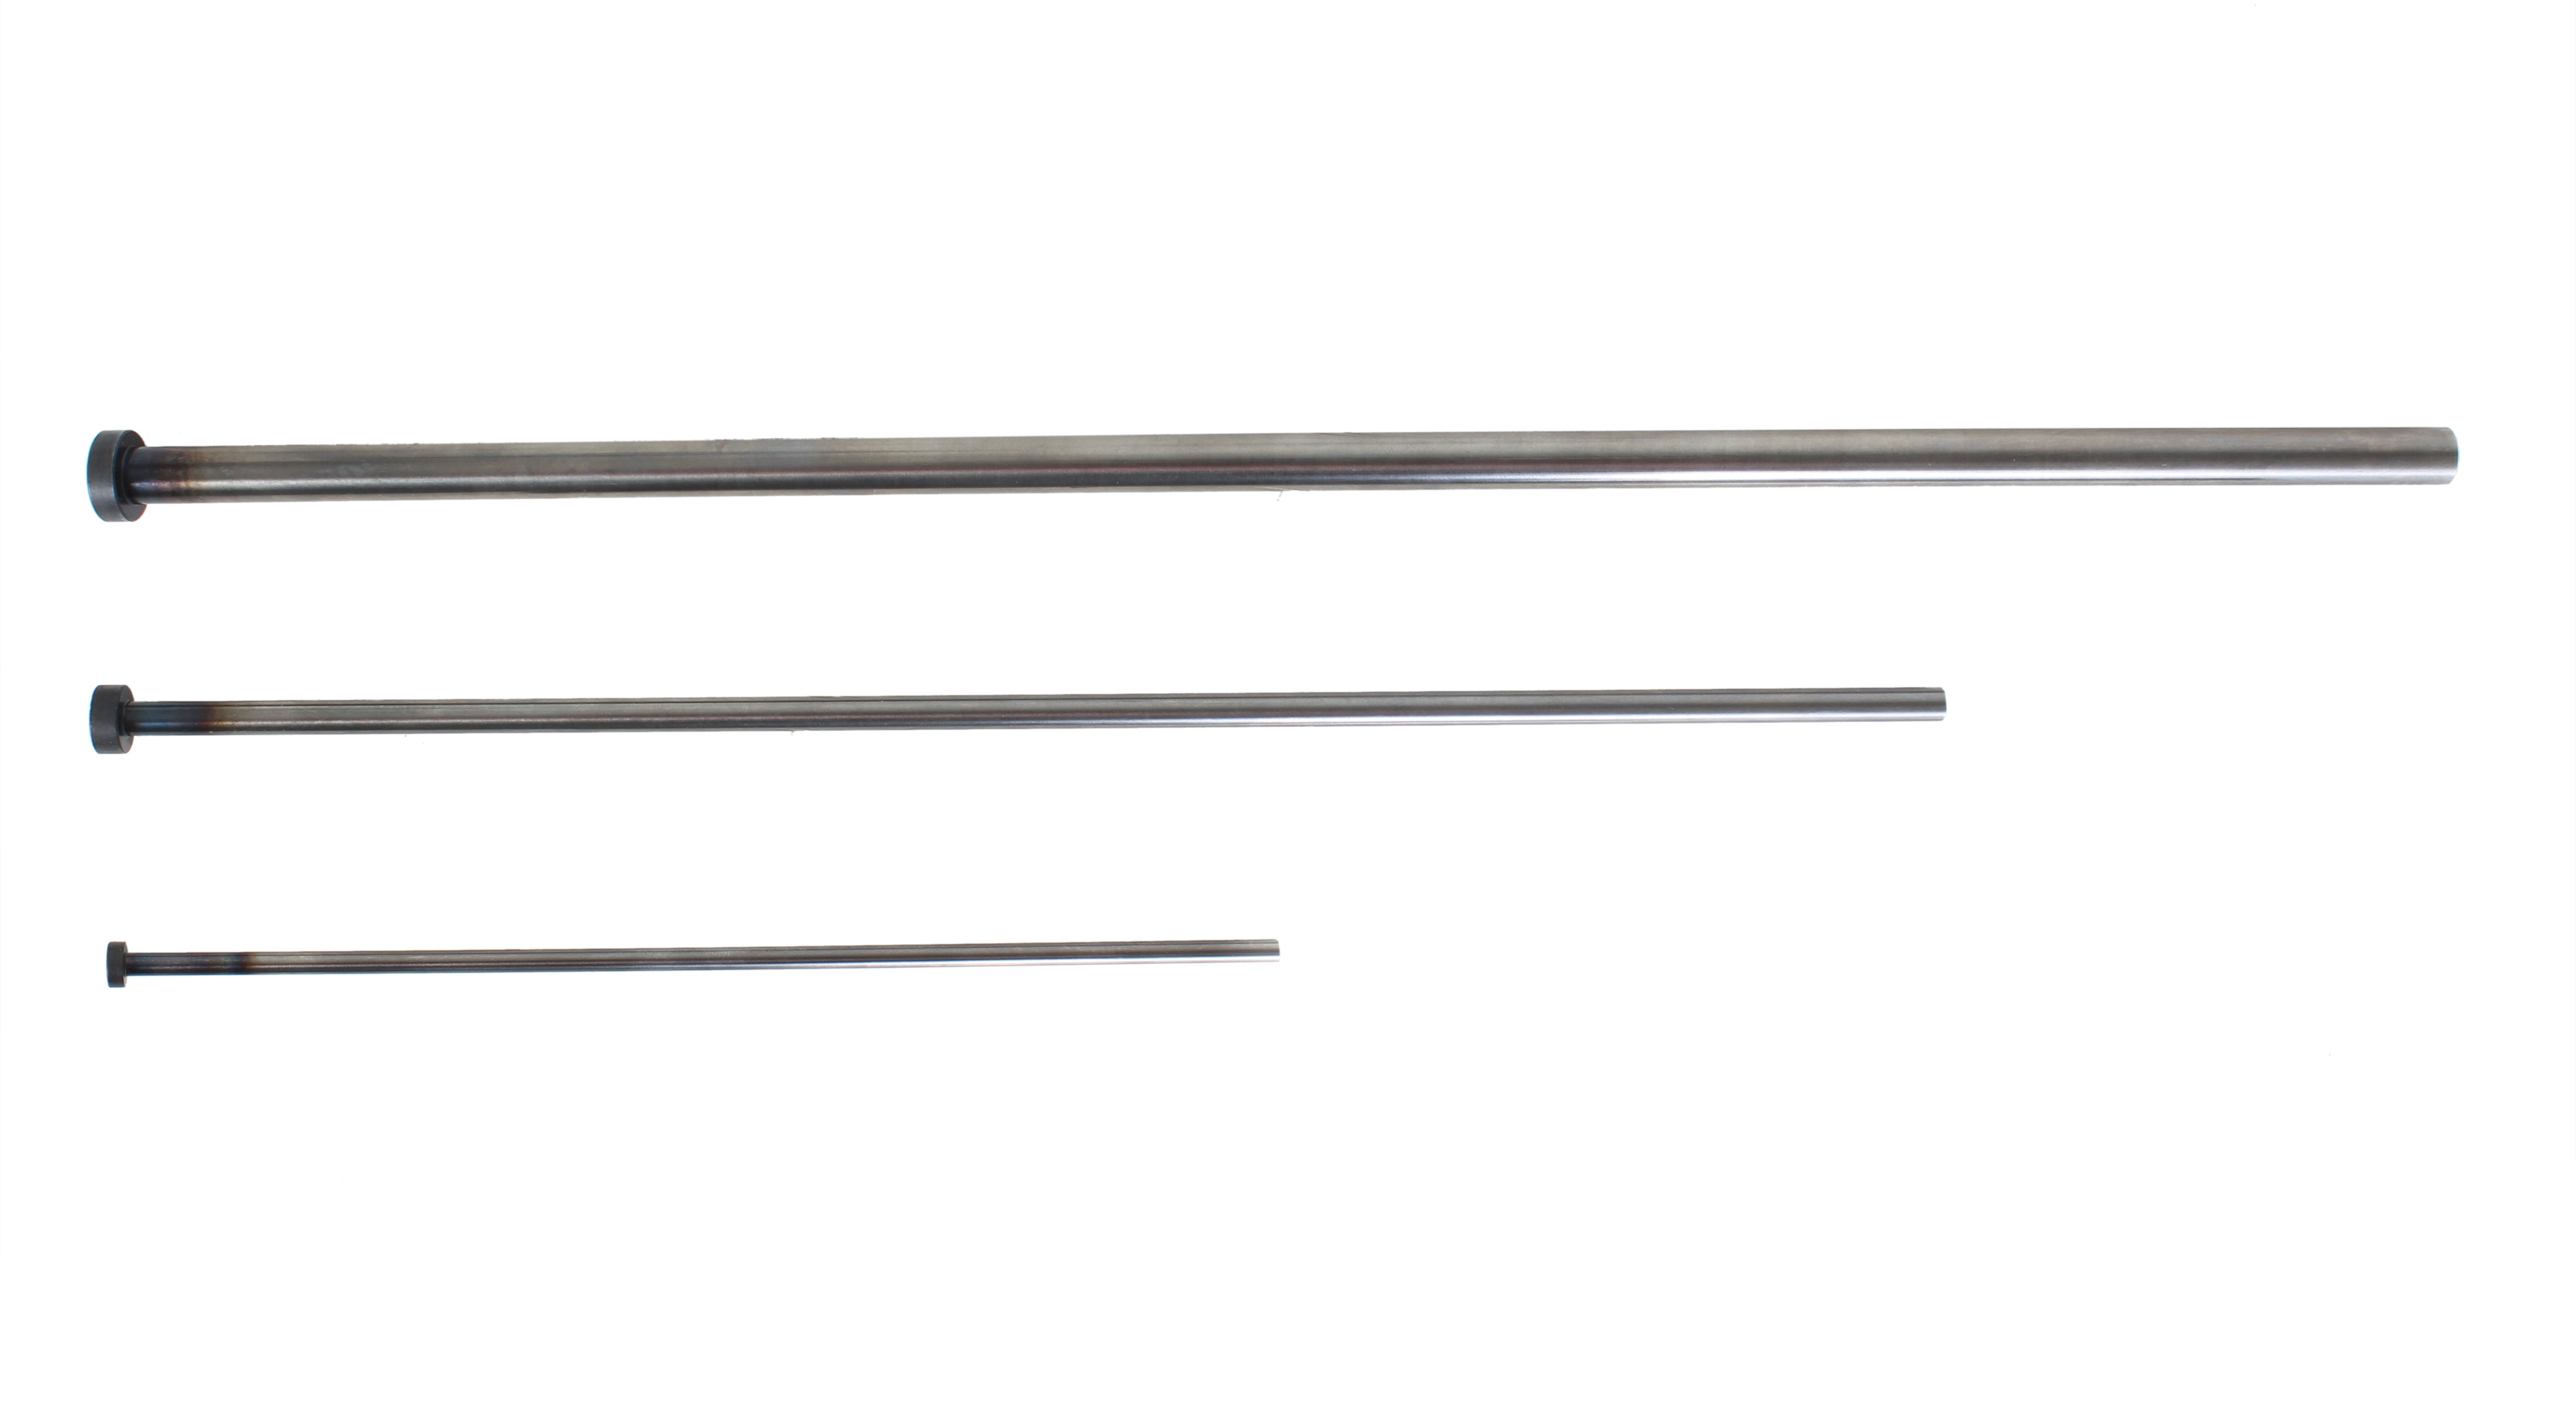 STRAIGHT EJECTOR PINS -DIN Type/1.2344 equivalent+Nitrided/Standard-